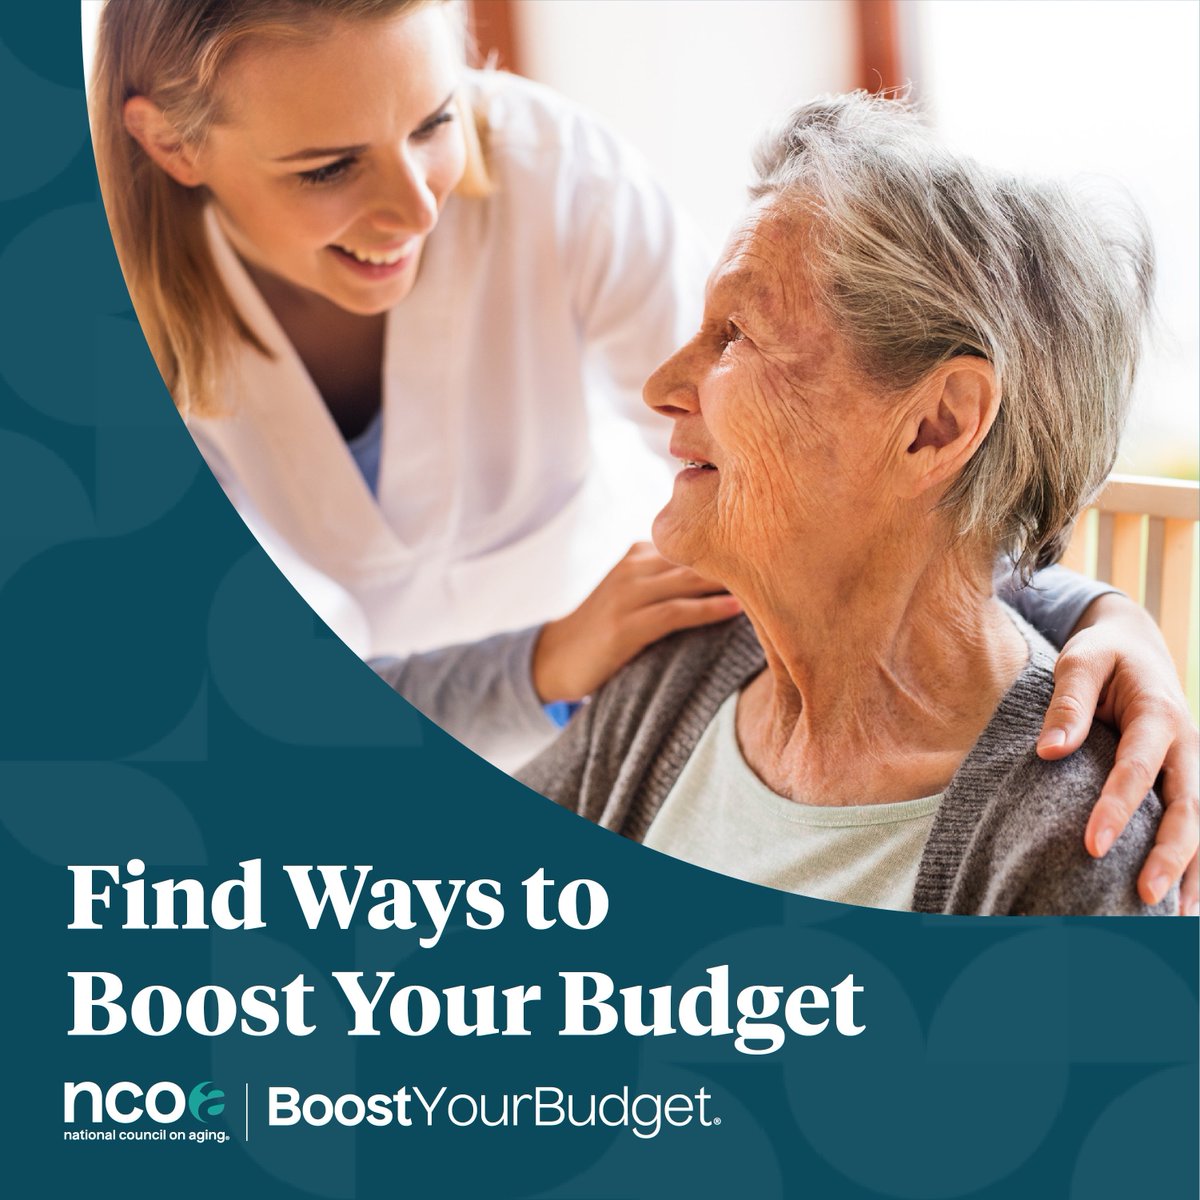 Many obstacles stand between you and a budget built for aging well. Benefits programs can help with costs like utilities, housing, medication, and food. Celebrate #BoostYourBudgetWeek by getting a free checkup for yourself or a loved one. ncoa.org/boost